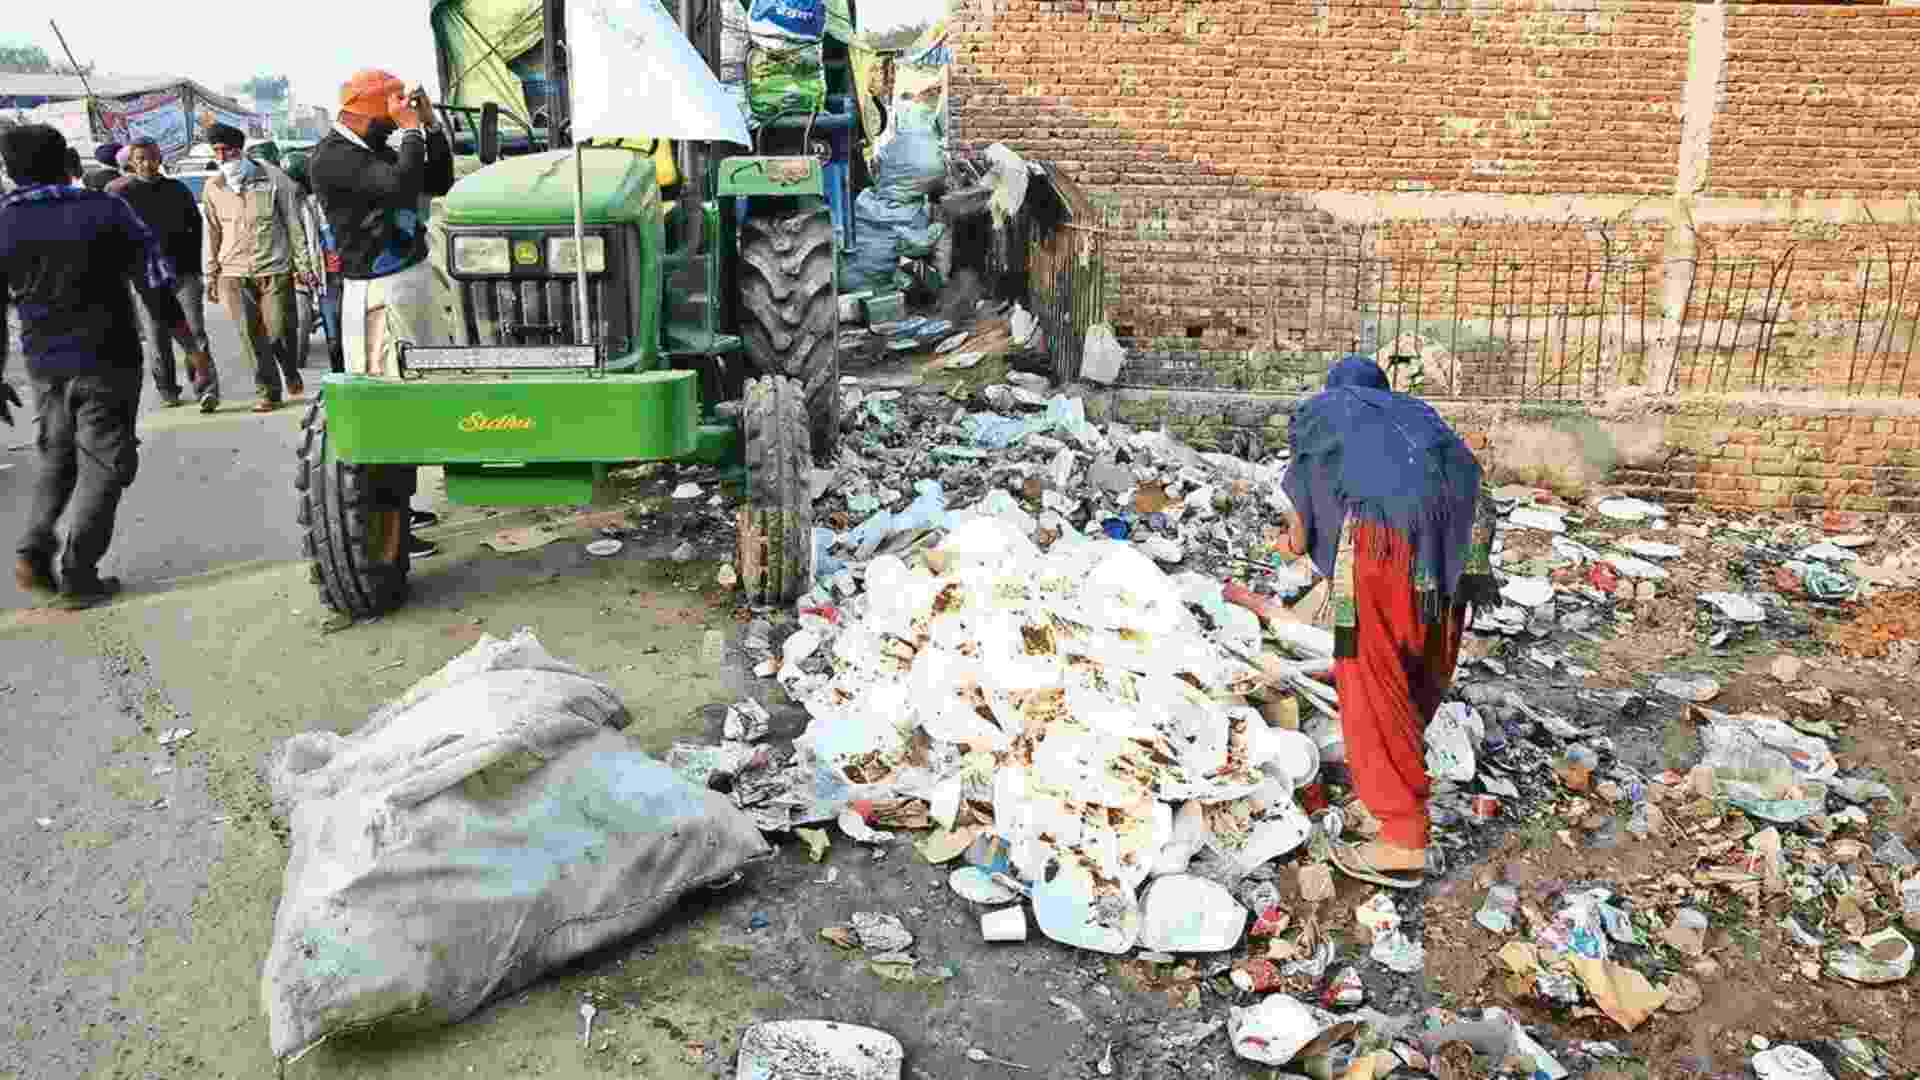 Chandigarh Resident Receives Rs. 73,000 Garbage Collection Bill!